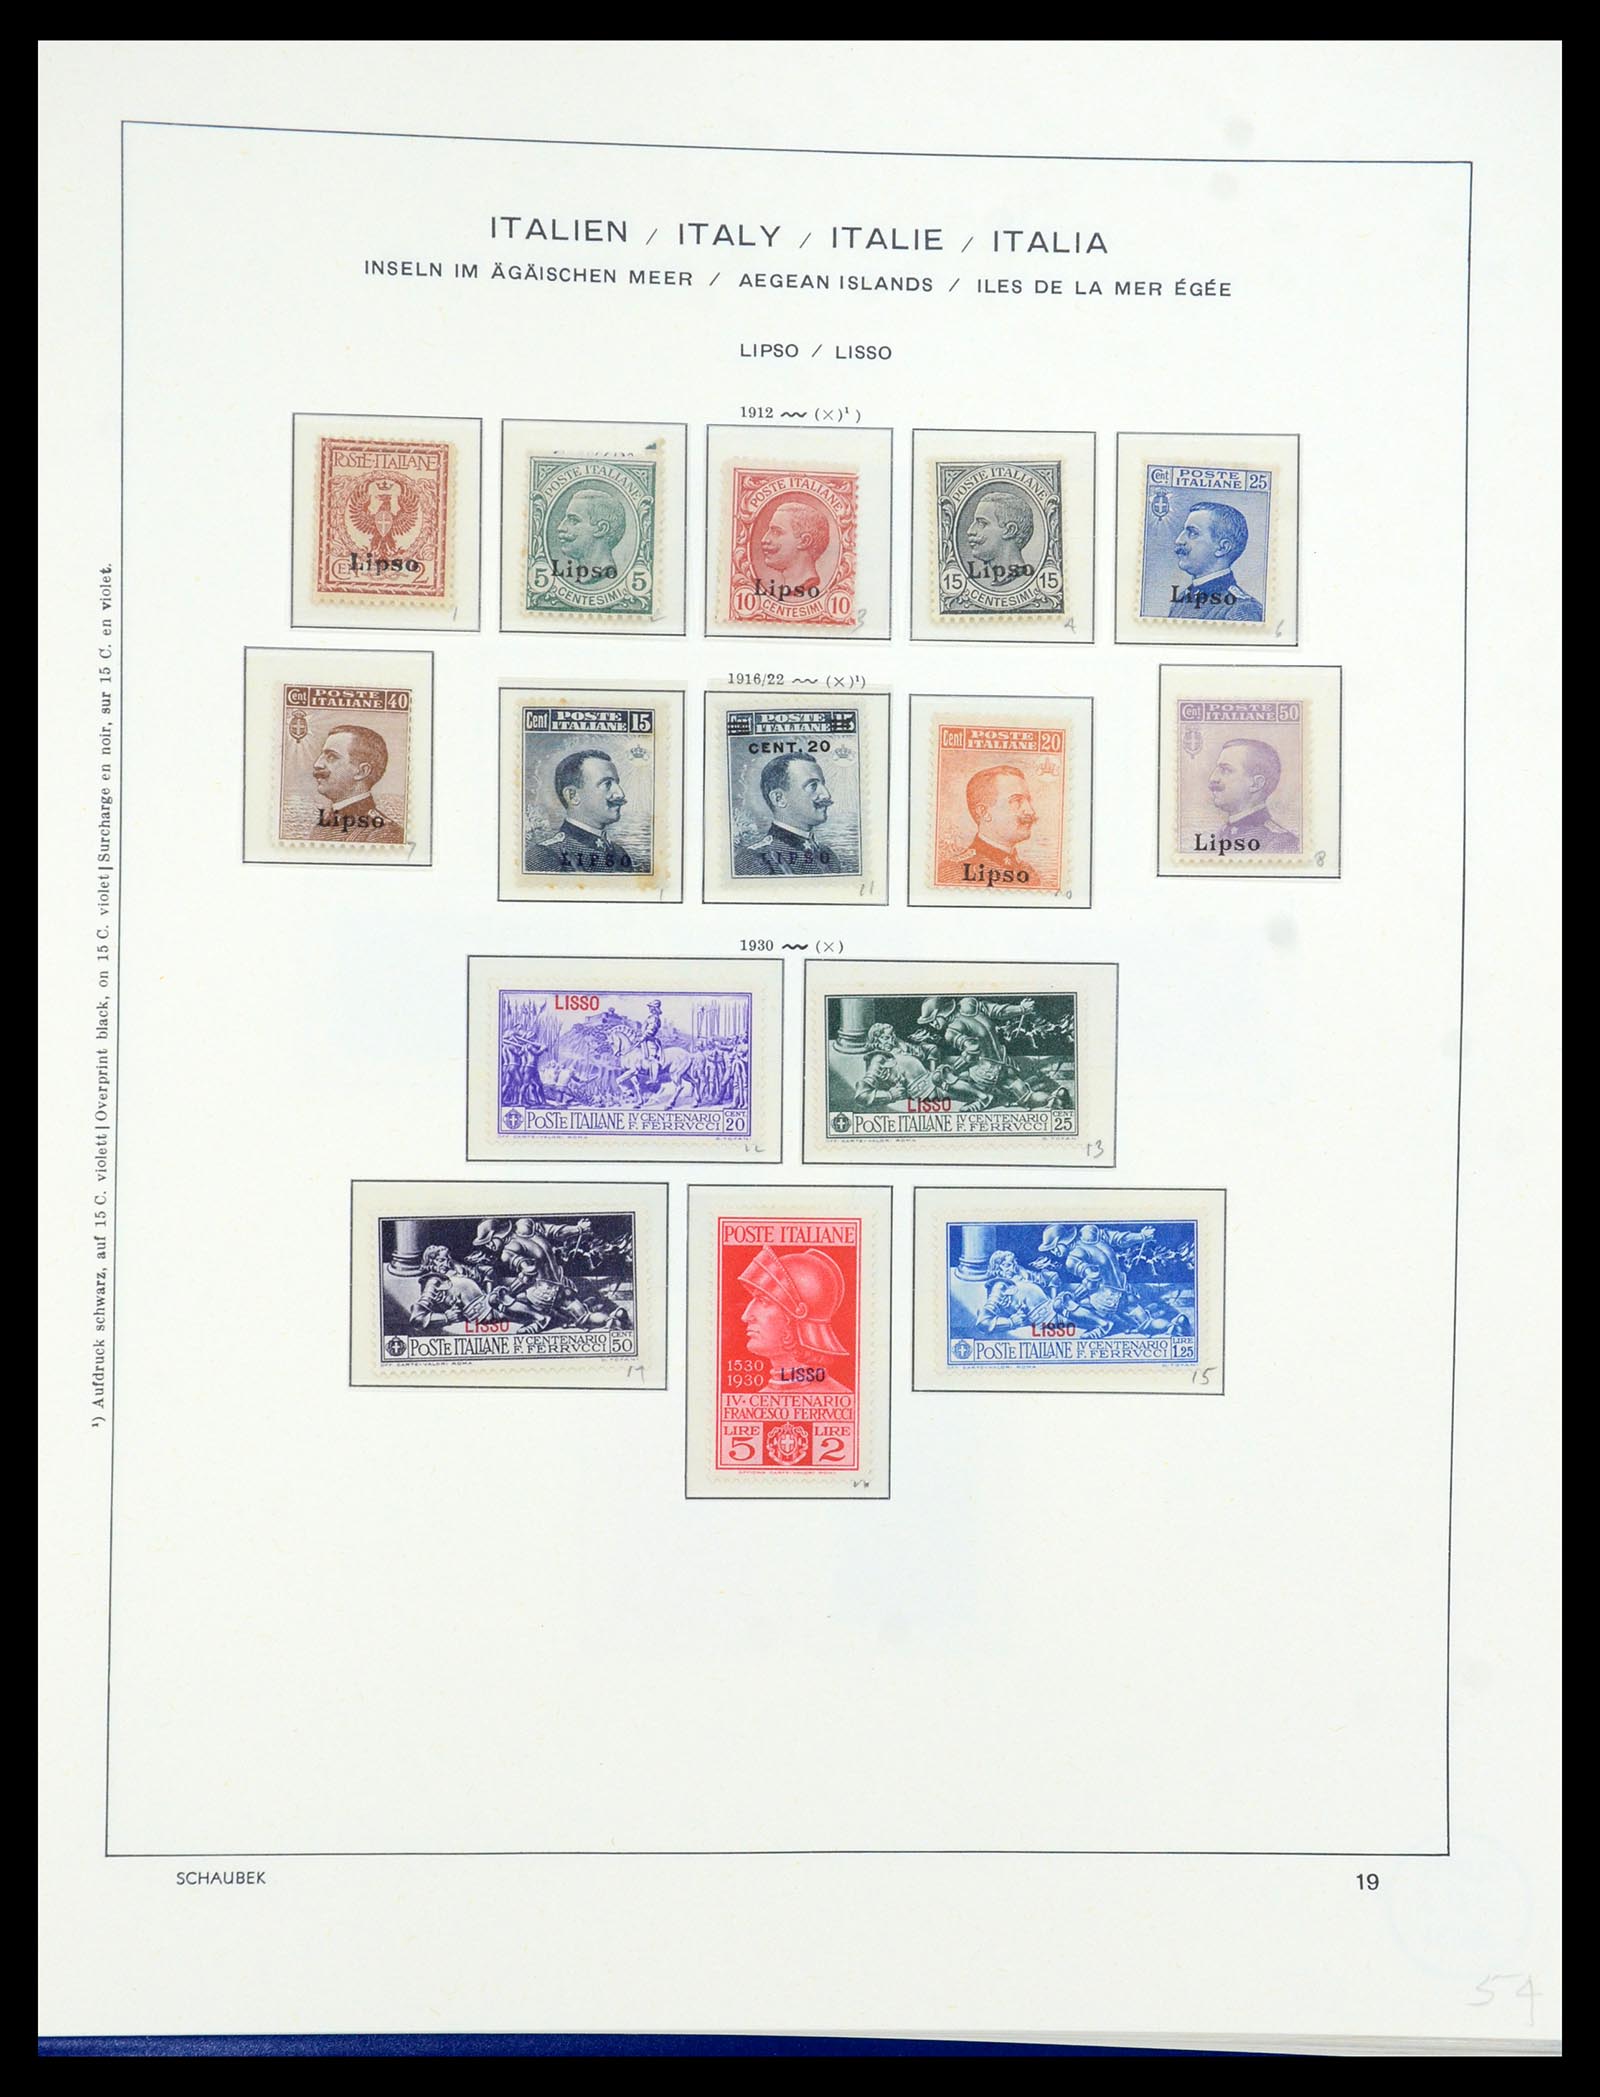 36181 024 - Stamp collection 36181 Italian Aegean Islands 1912-1941.